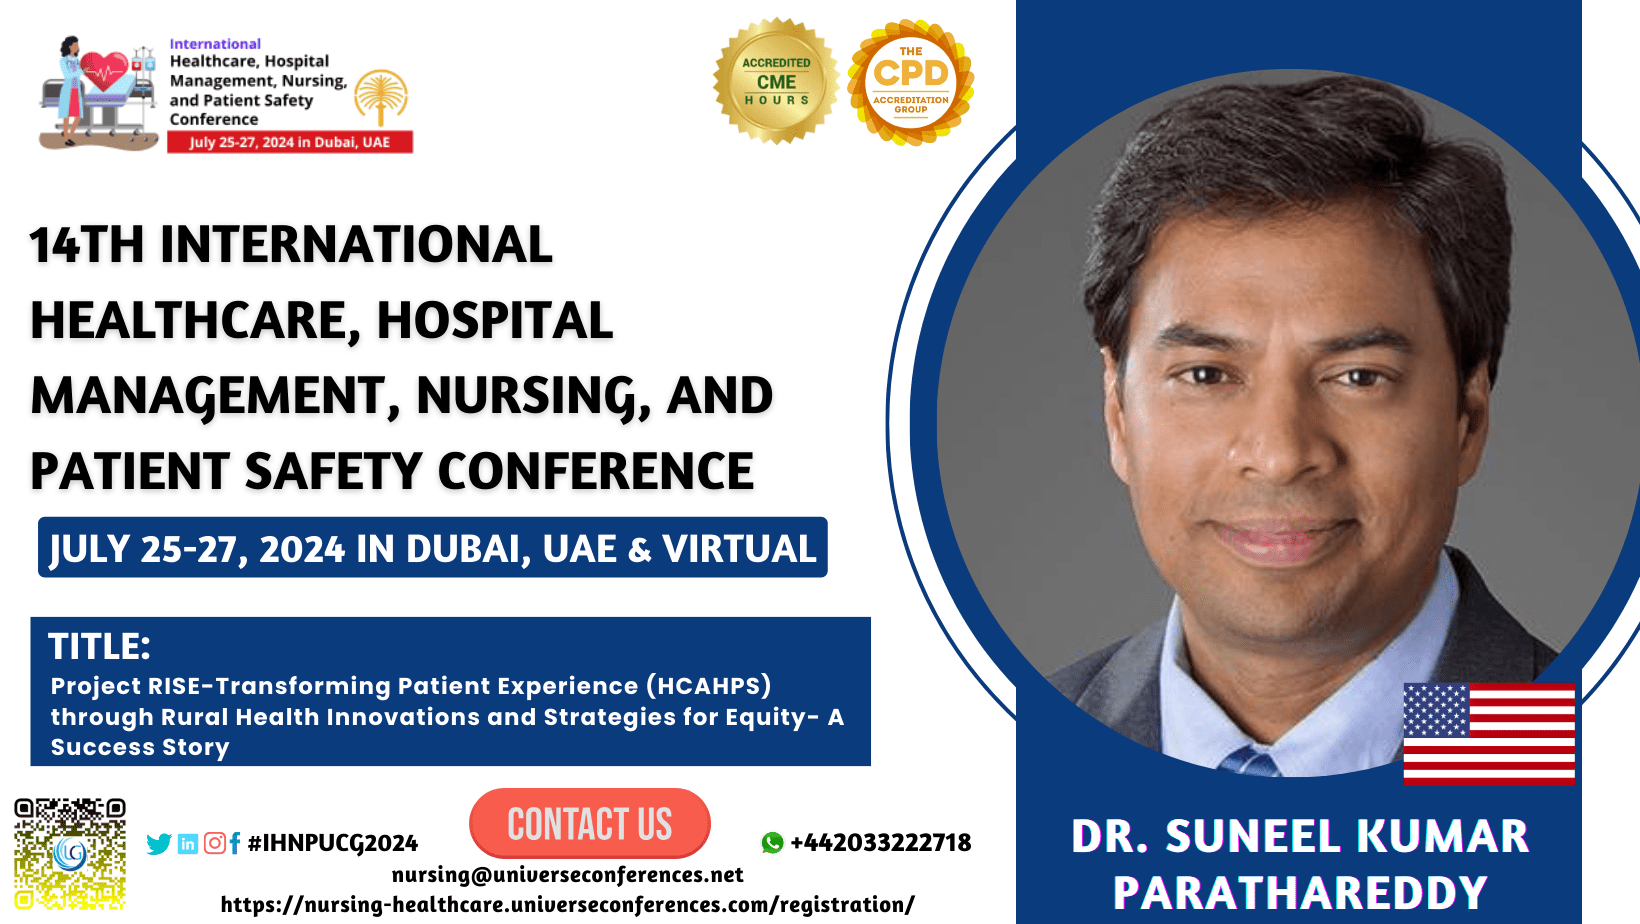 Dr. Suneel Kumar Parathareddy_14th International Healthcare, Hospital Management, Nursing, and Patient Safety Conference